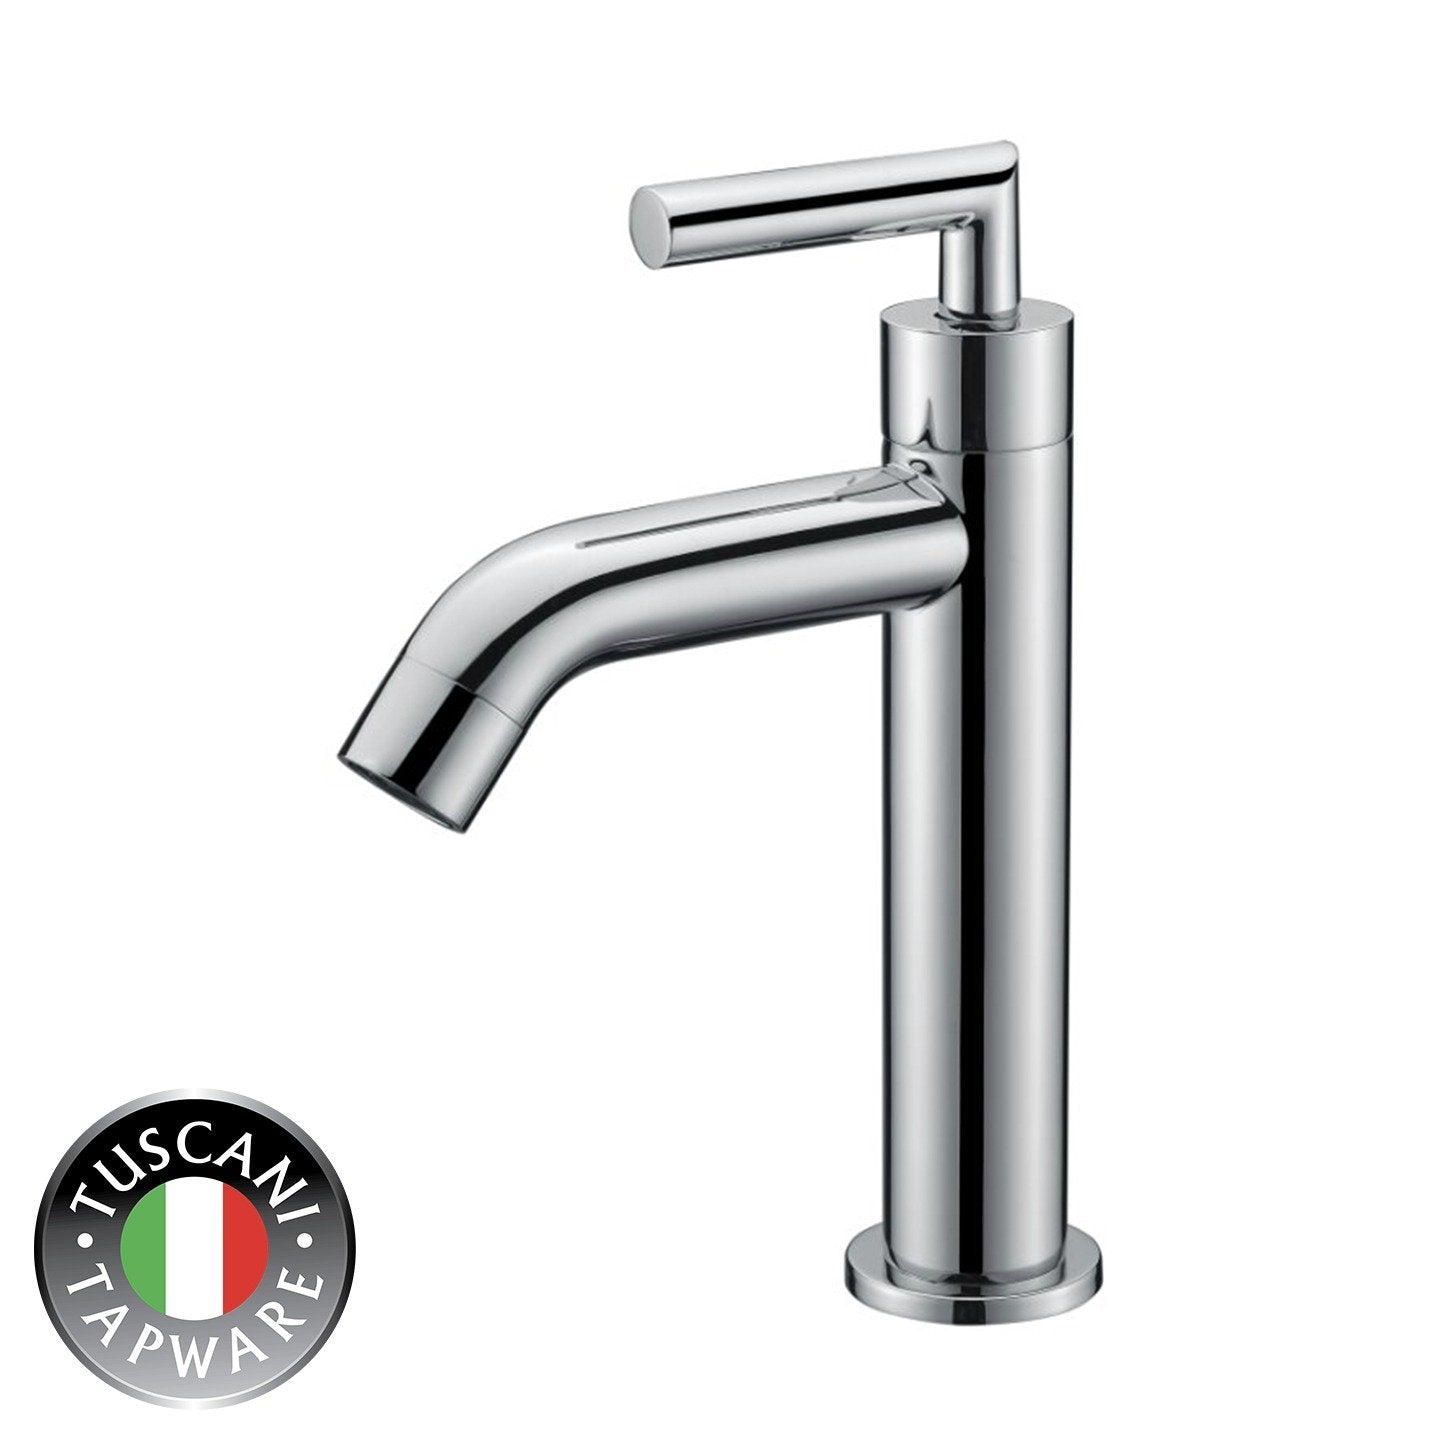 Photo of HYDROSMITH Series Basin Tap - Cold Taps